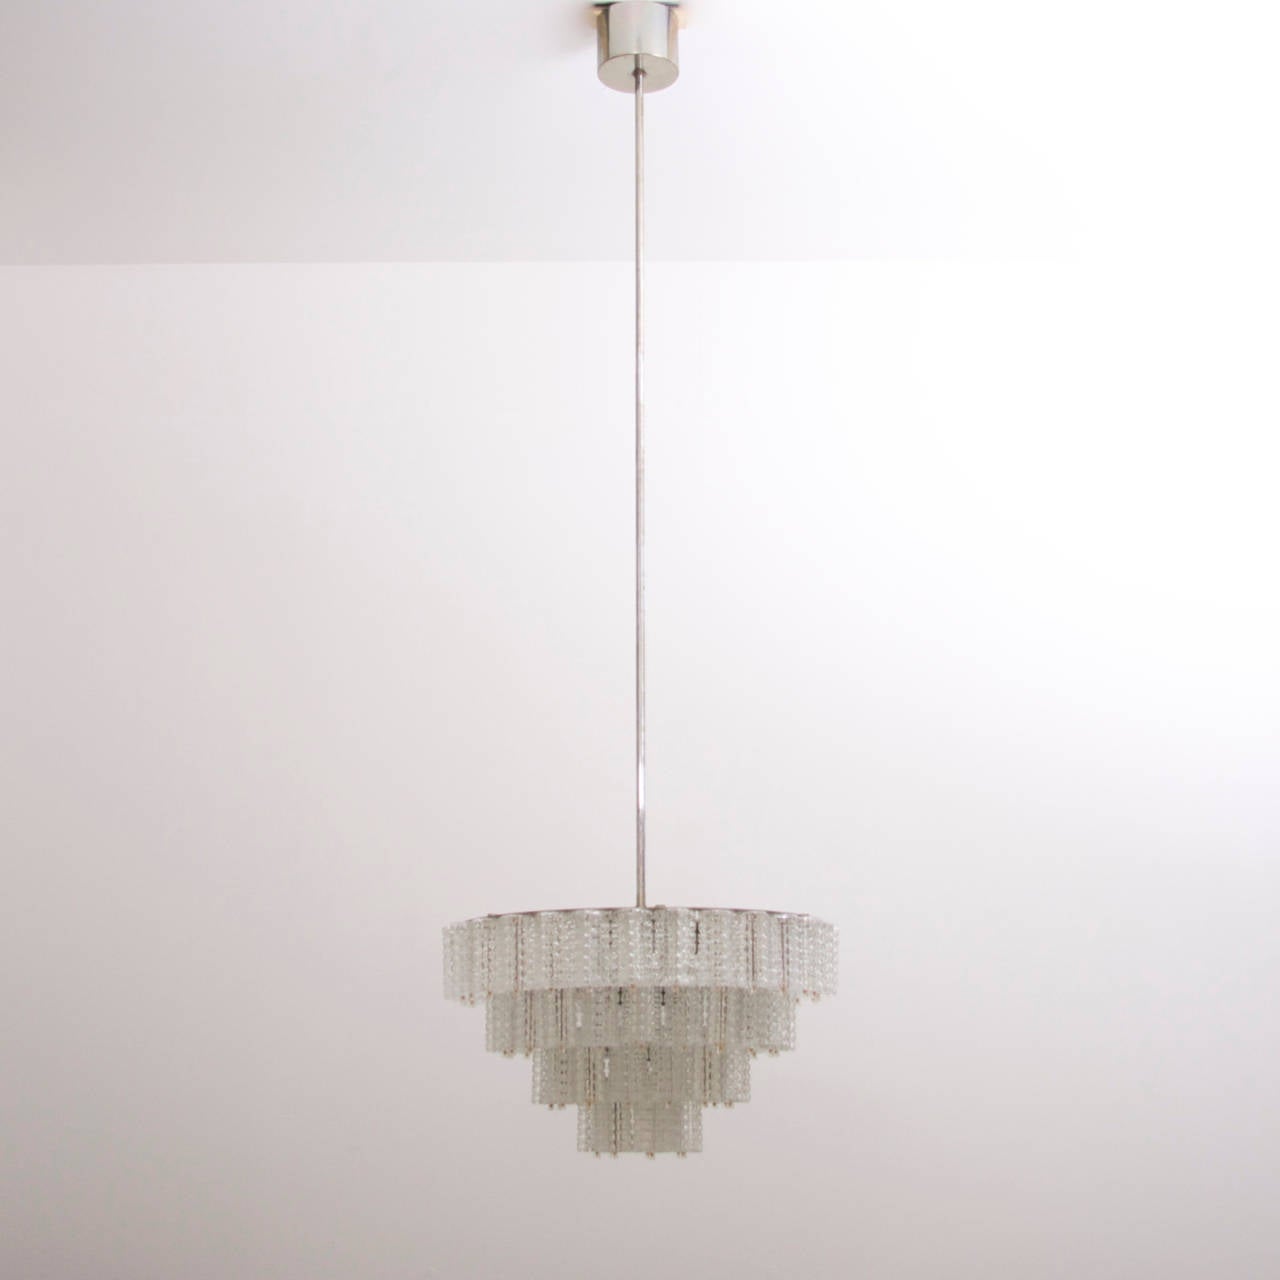 Wonderful and rare glass chandelier by Austrian high end manufacturer Austrolux. The chandeliers are high quality production from the 1960s. The light shines through the structured glasses and creates a cozy atmosphere in every room. The chandelier